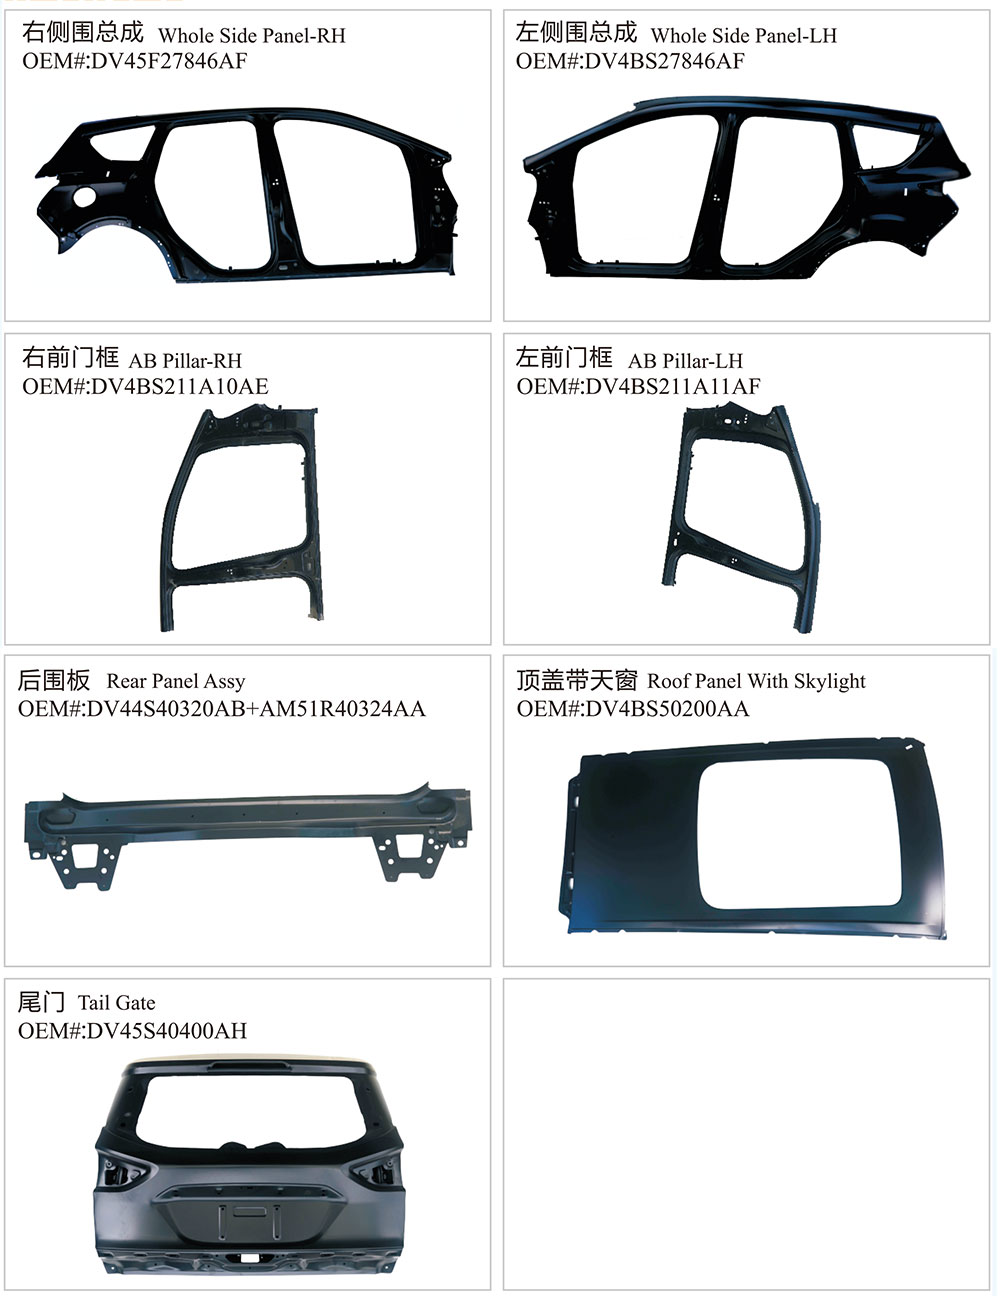 Rear Panel Assy for Ford Kuga / Escape 2013